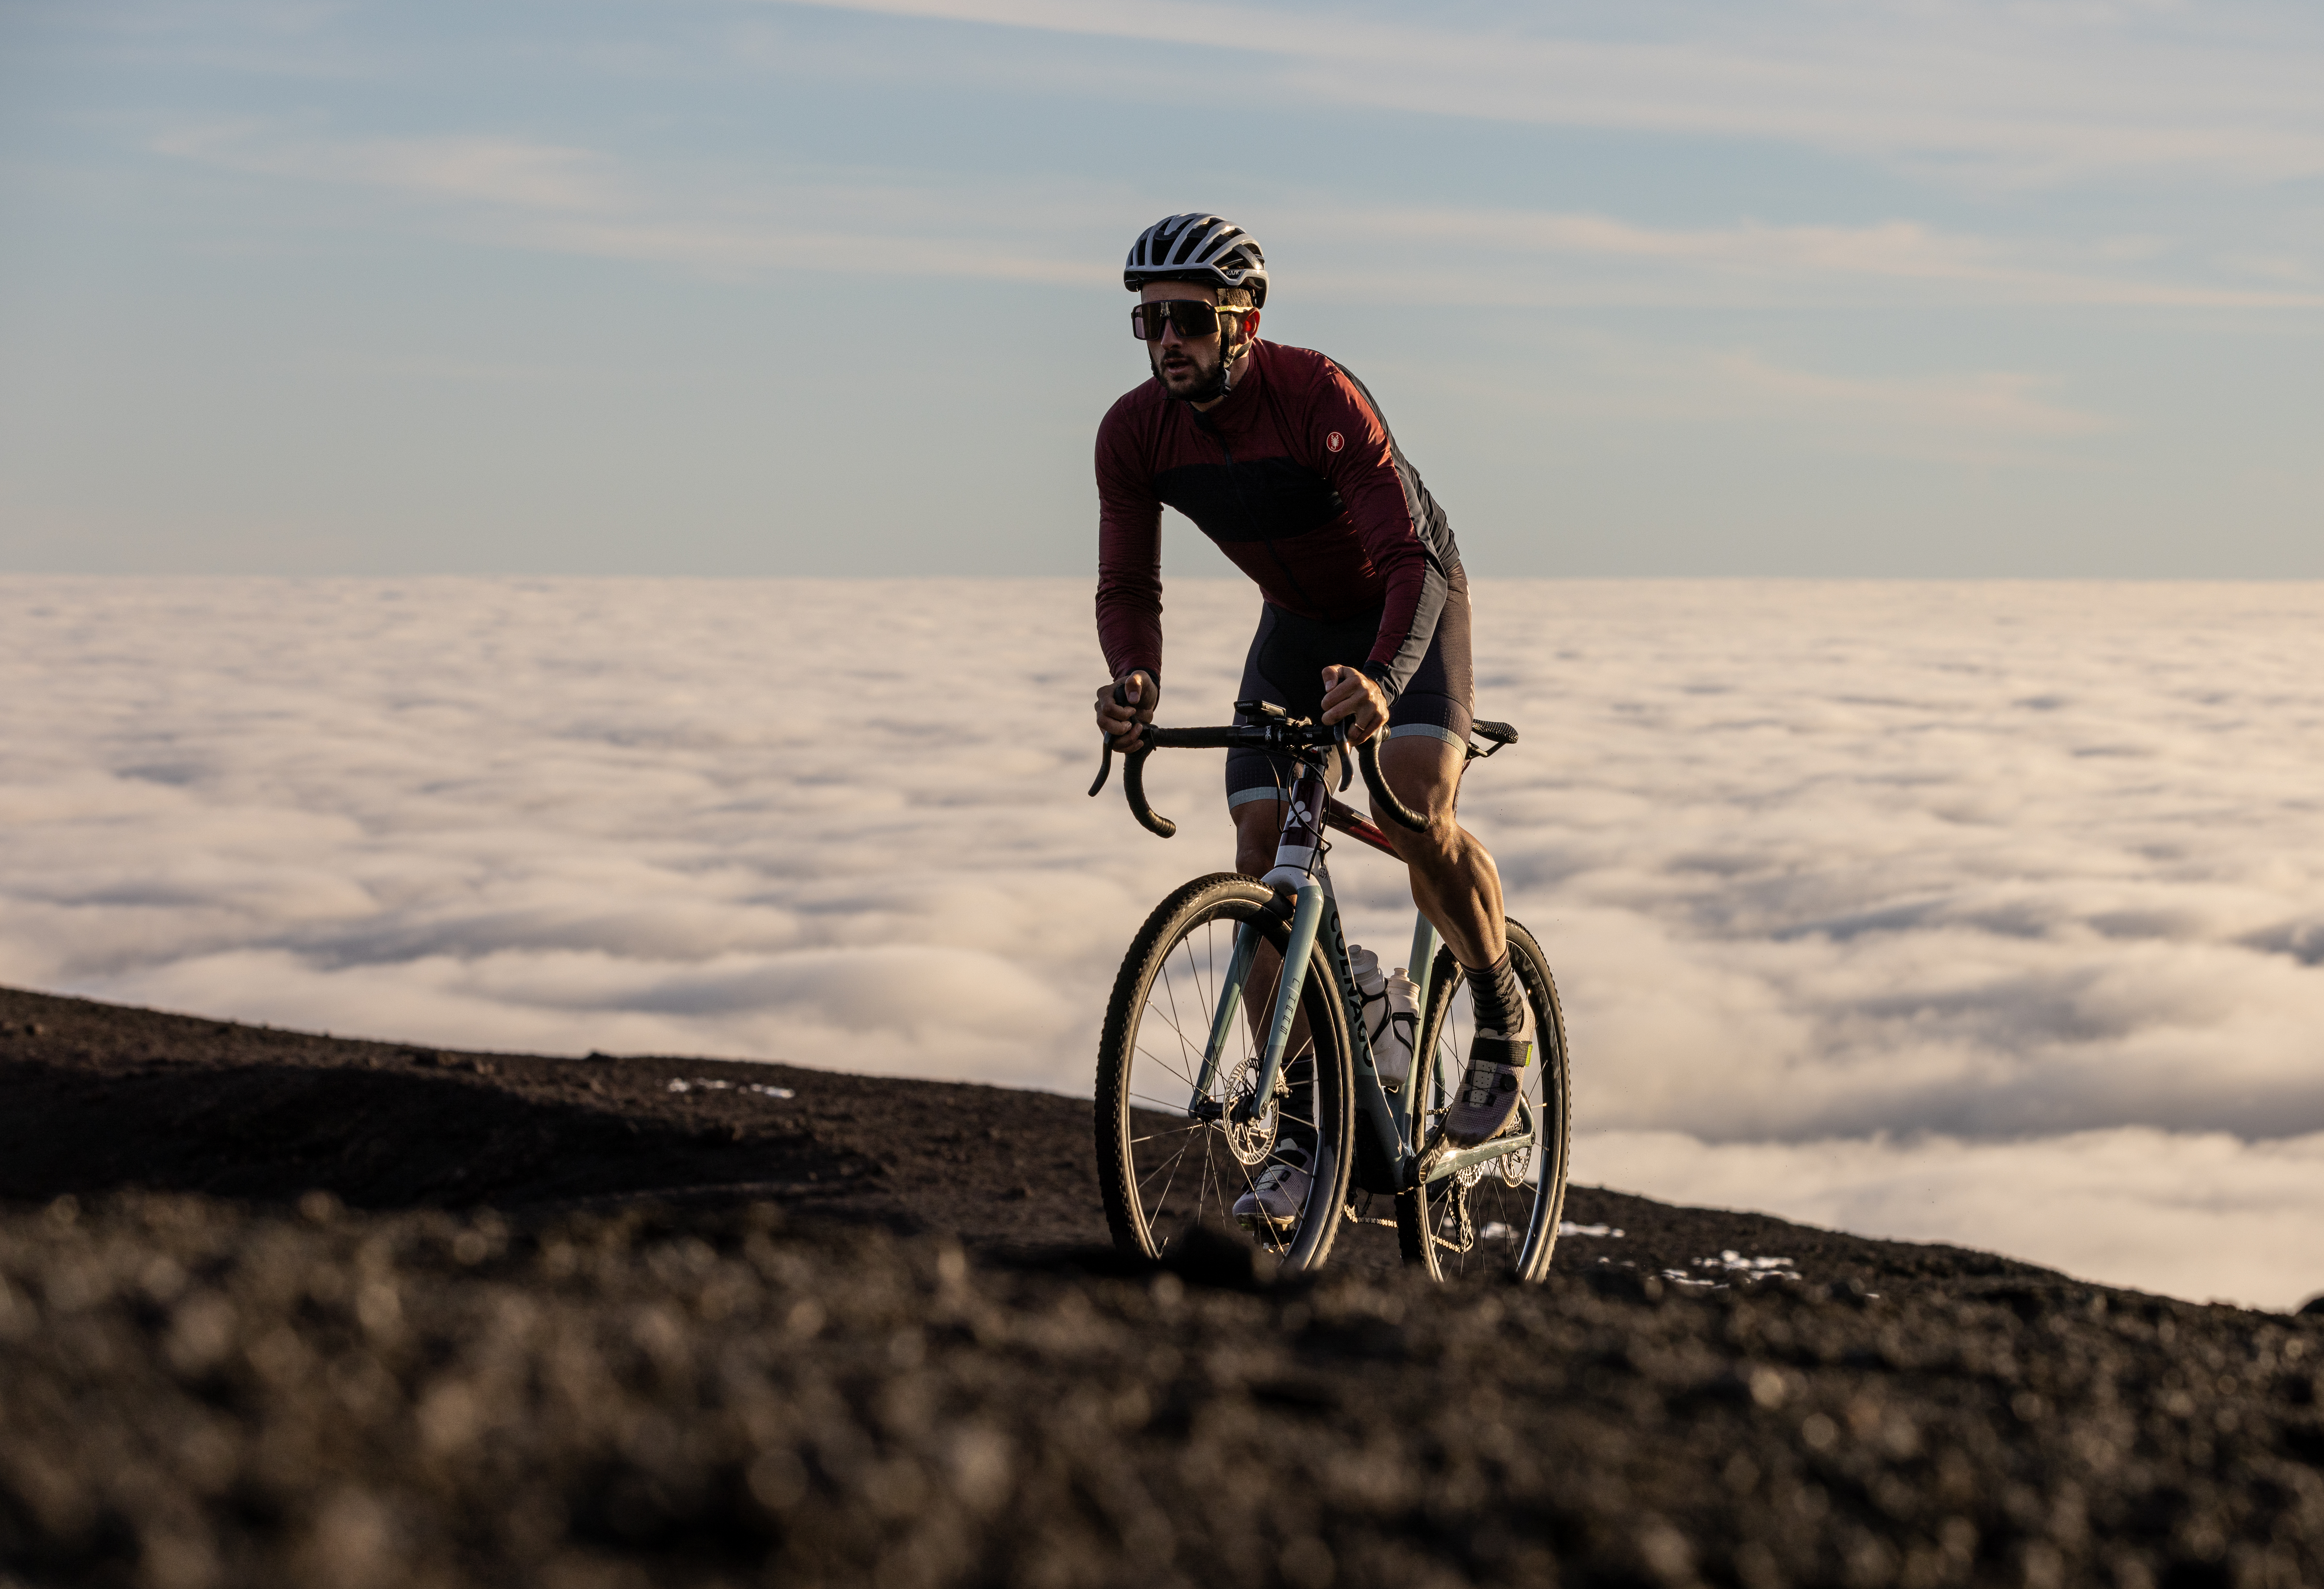 Campagnolo Levante gravel wheels on a bike being ridden on gravel, with a cloud inversion in the background